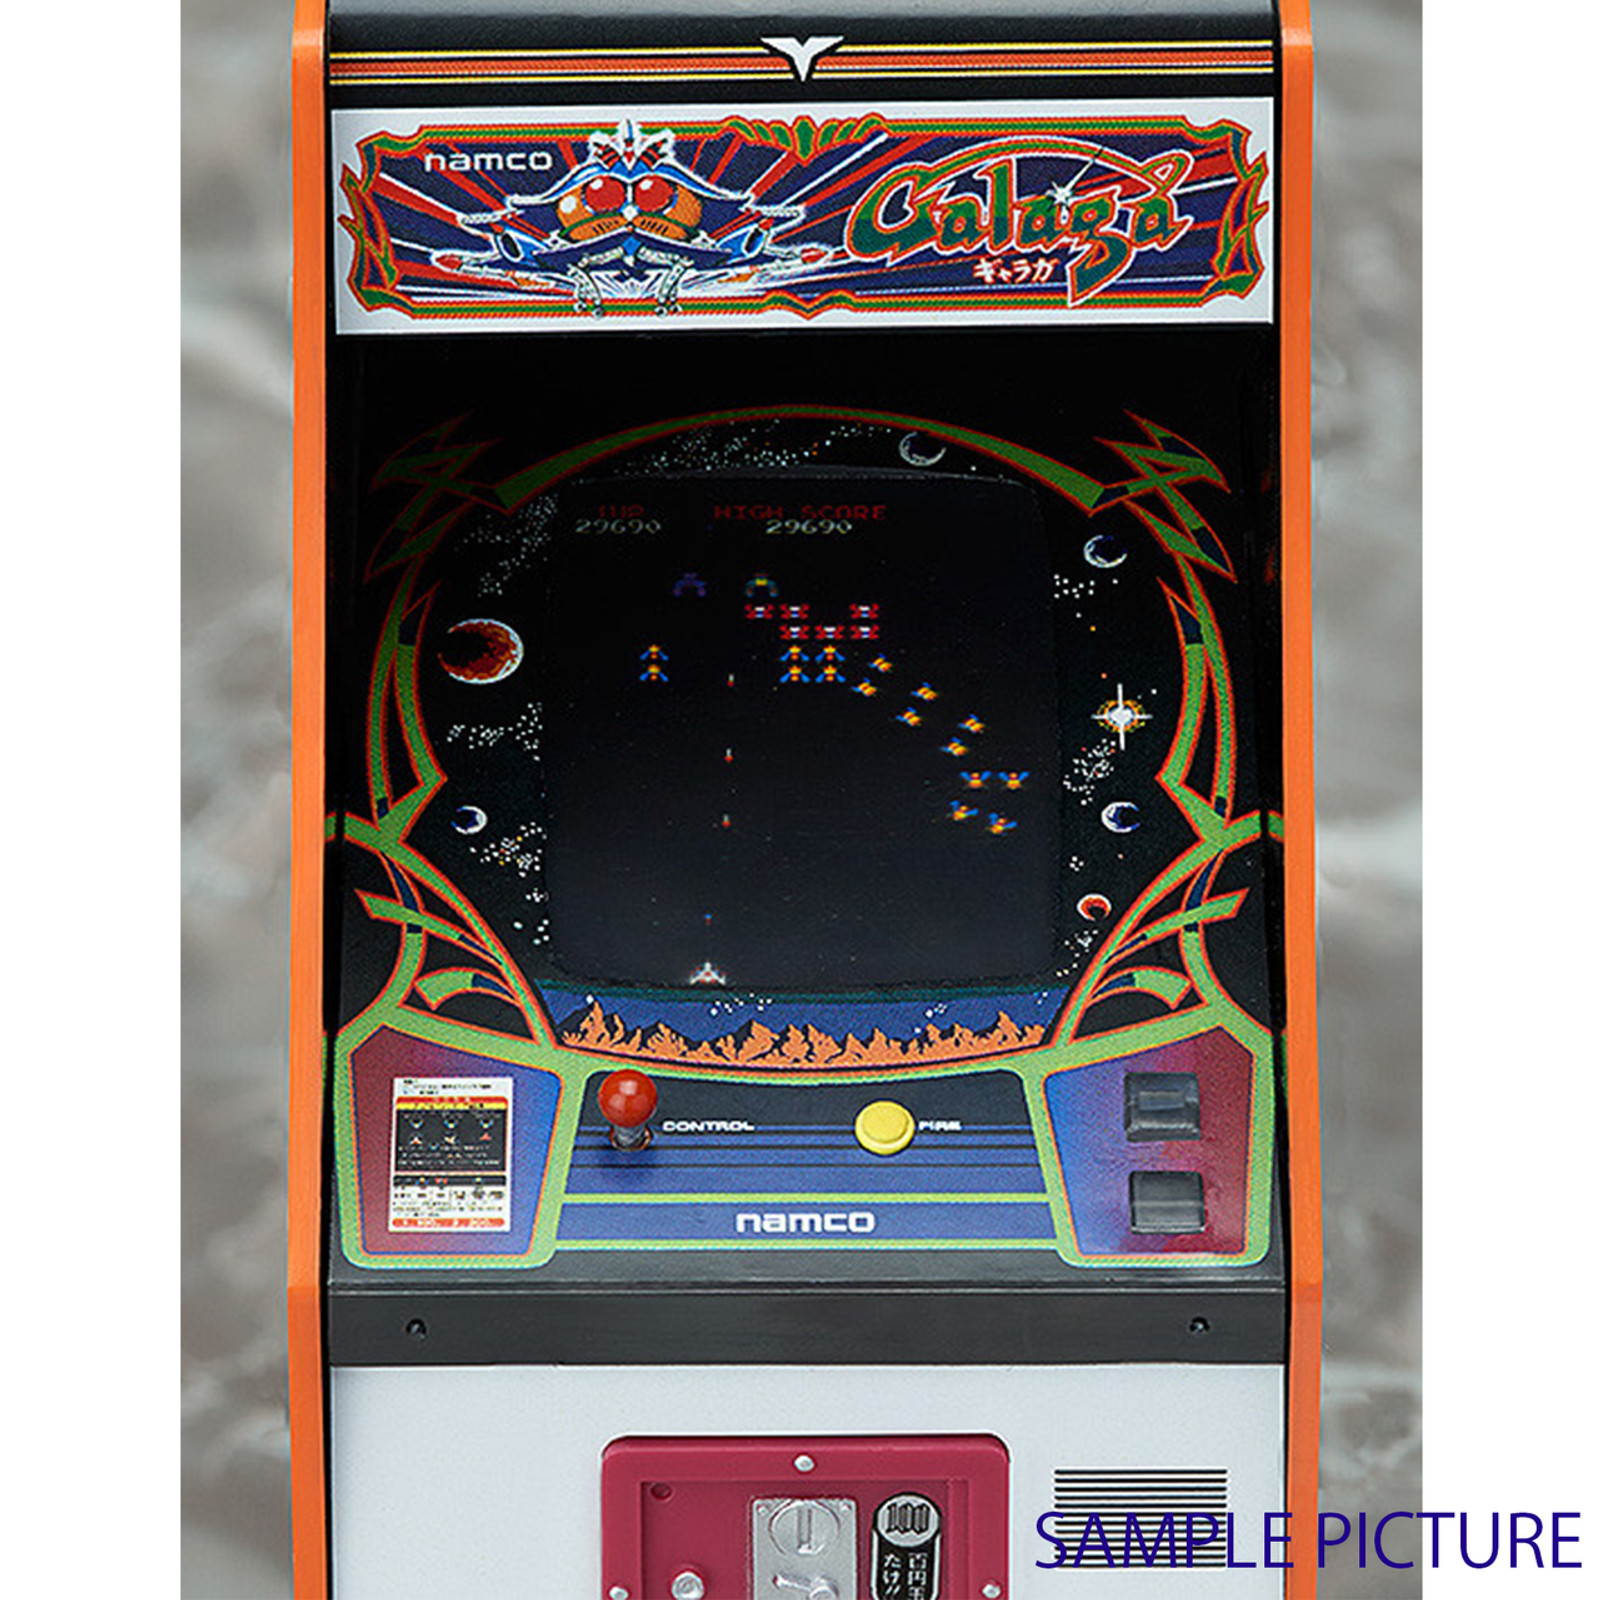 Pirates of the Orochi: Looking into a bootleg arcade board